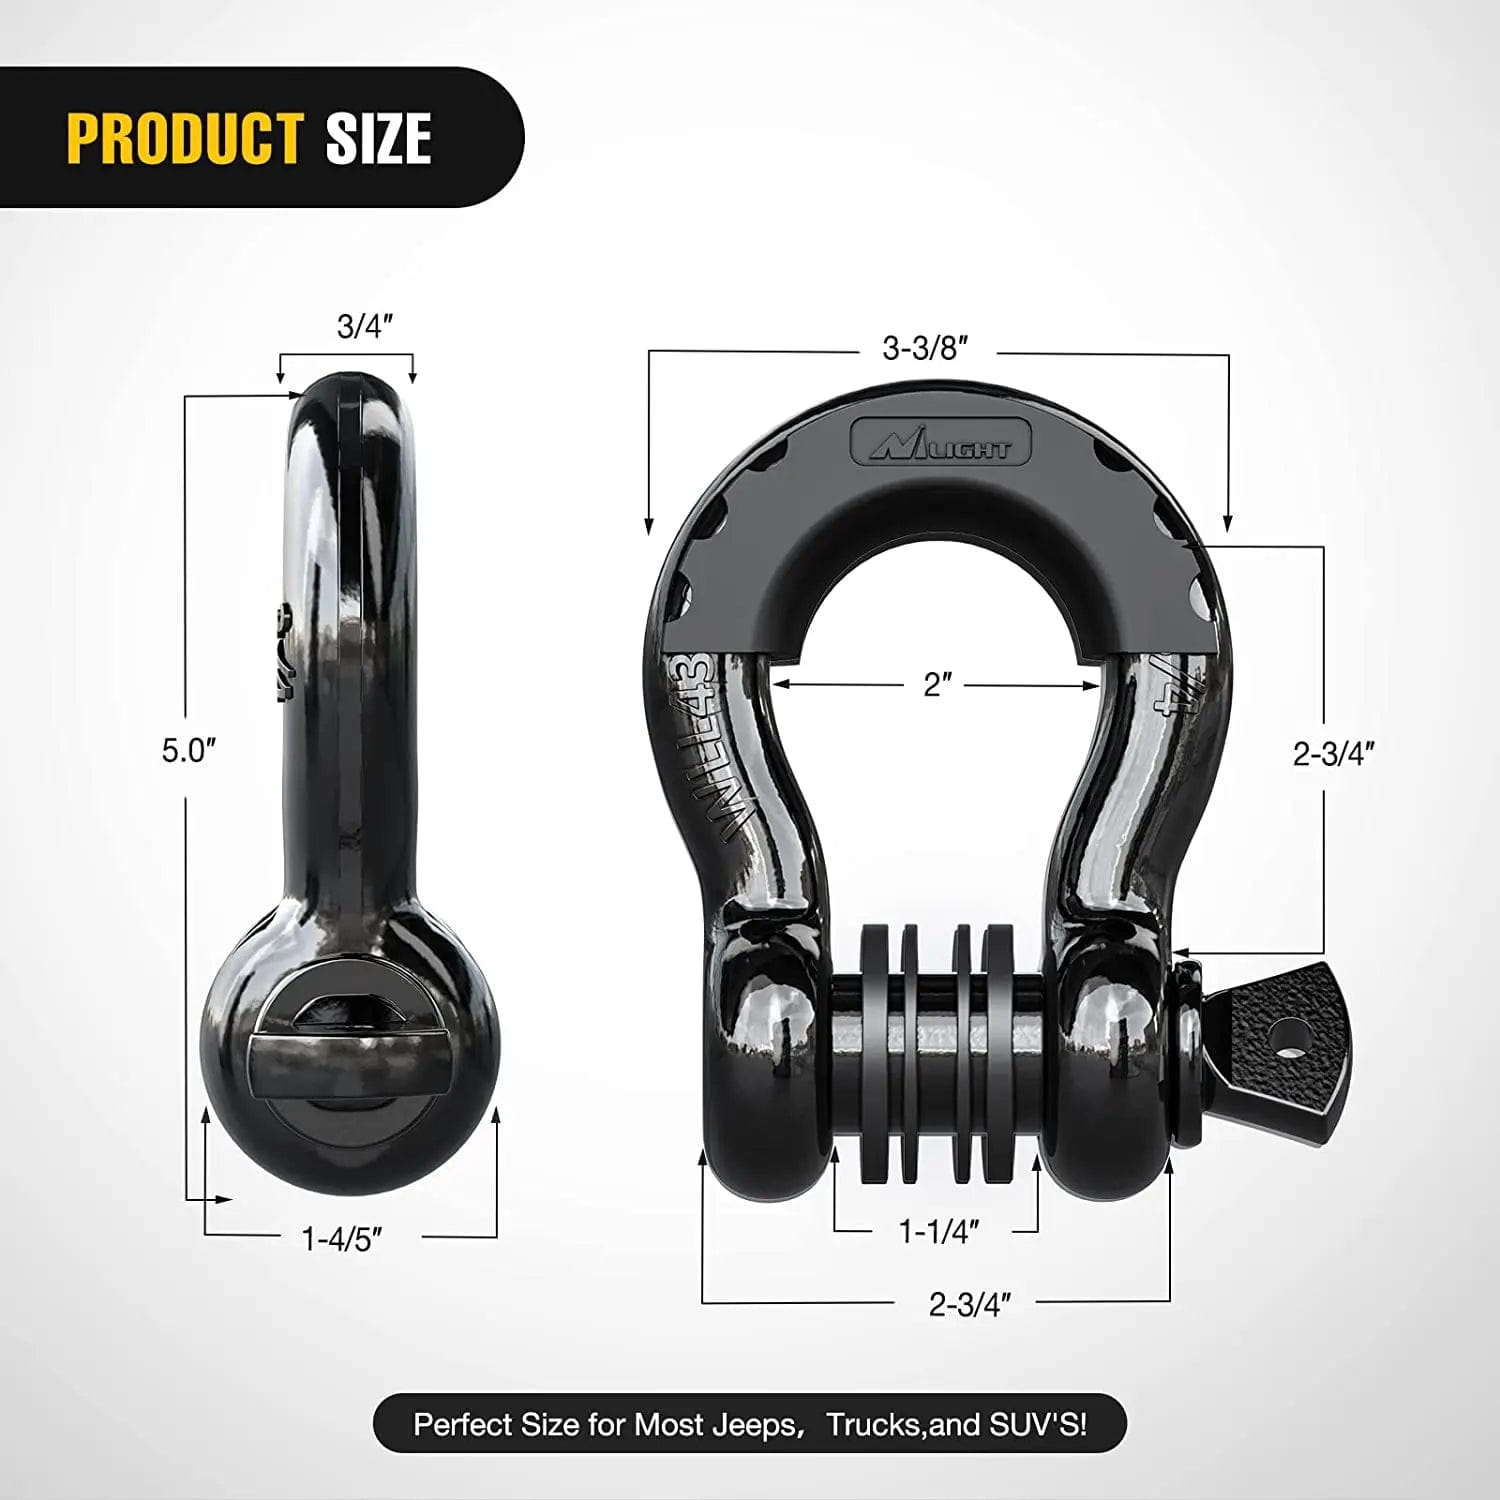 Shackle 3/4 inch D-Ring Shackle Black (Pair)